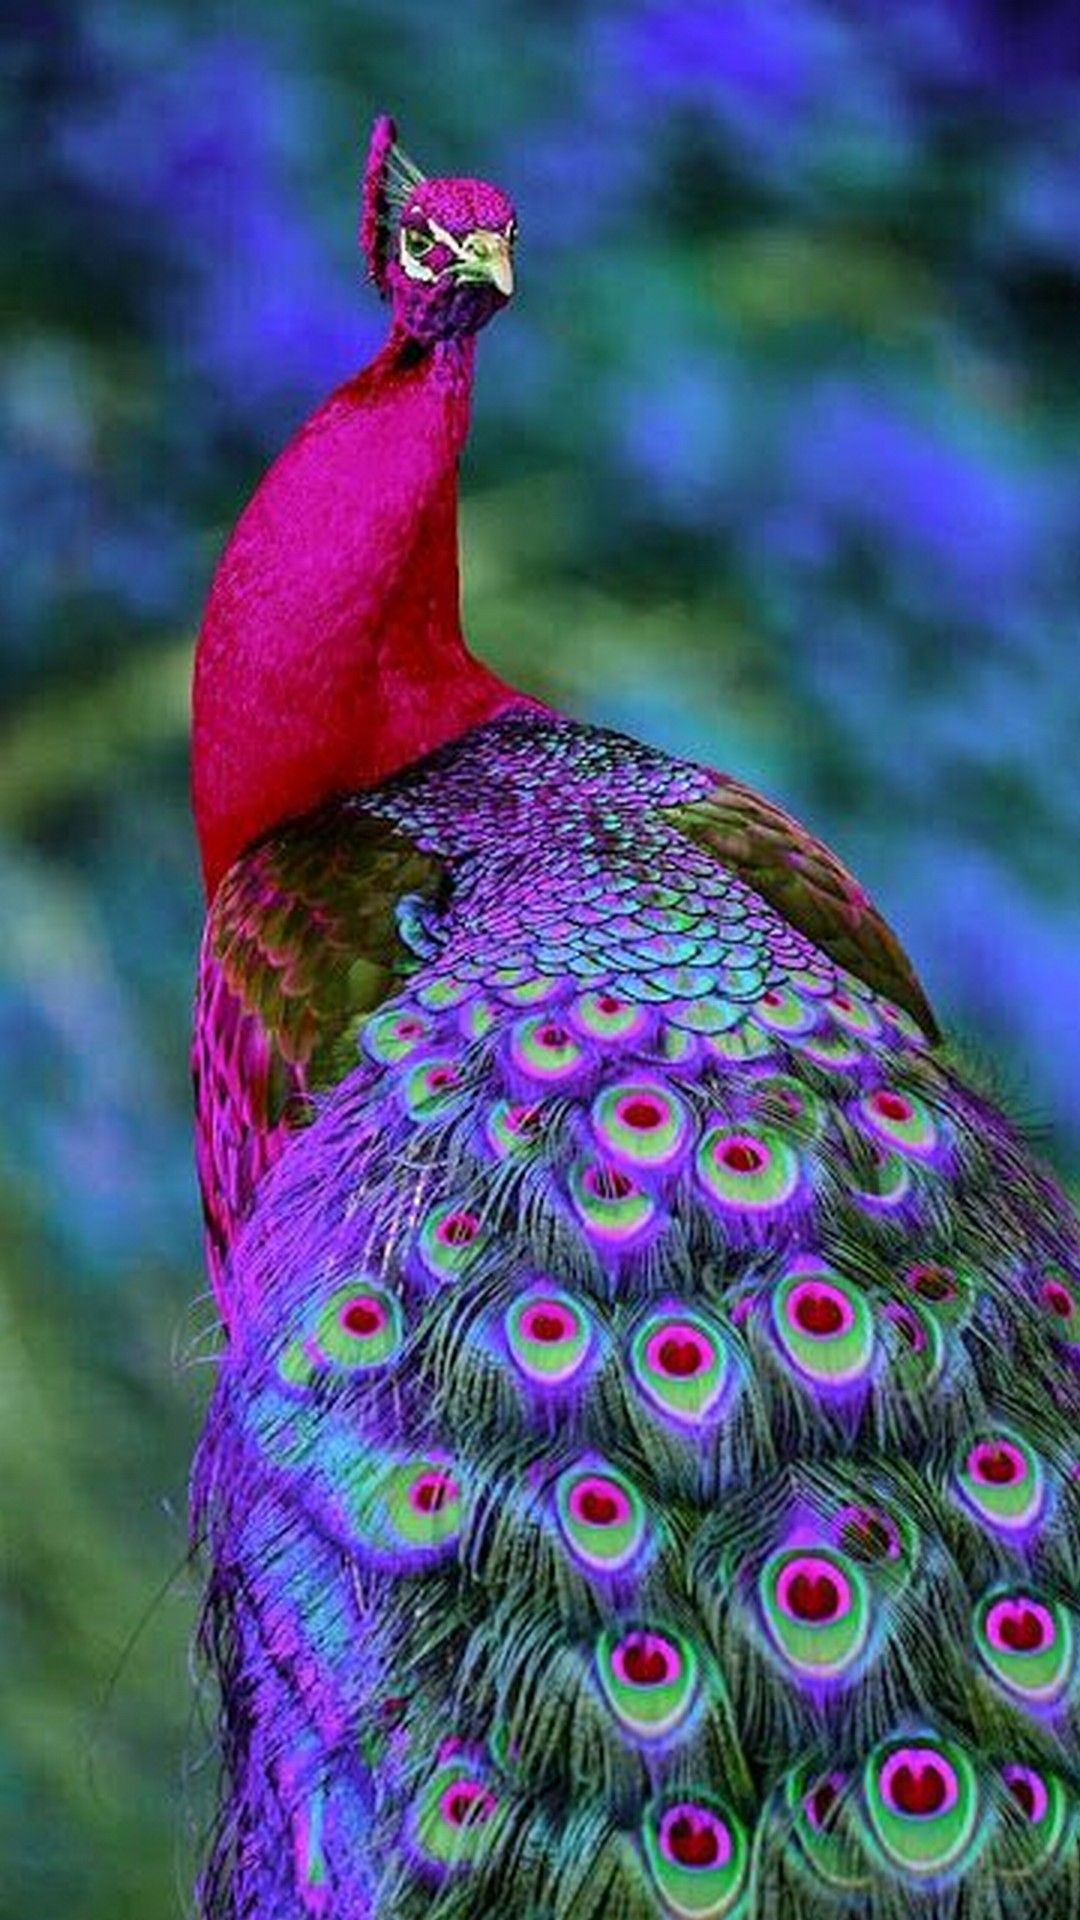 1080x1920 Colorful Peacock Wallpaper iPhone Best iPhone Wallpaper | Beautiful birds, Colorful birds, Most beautiful birds